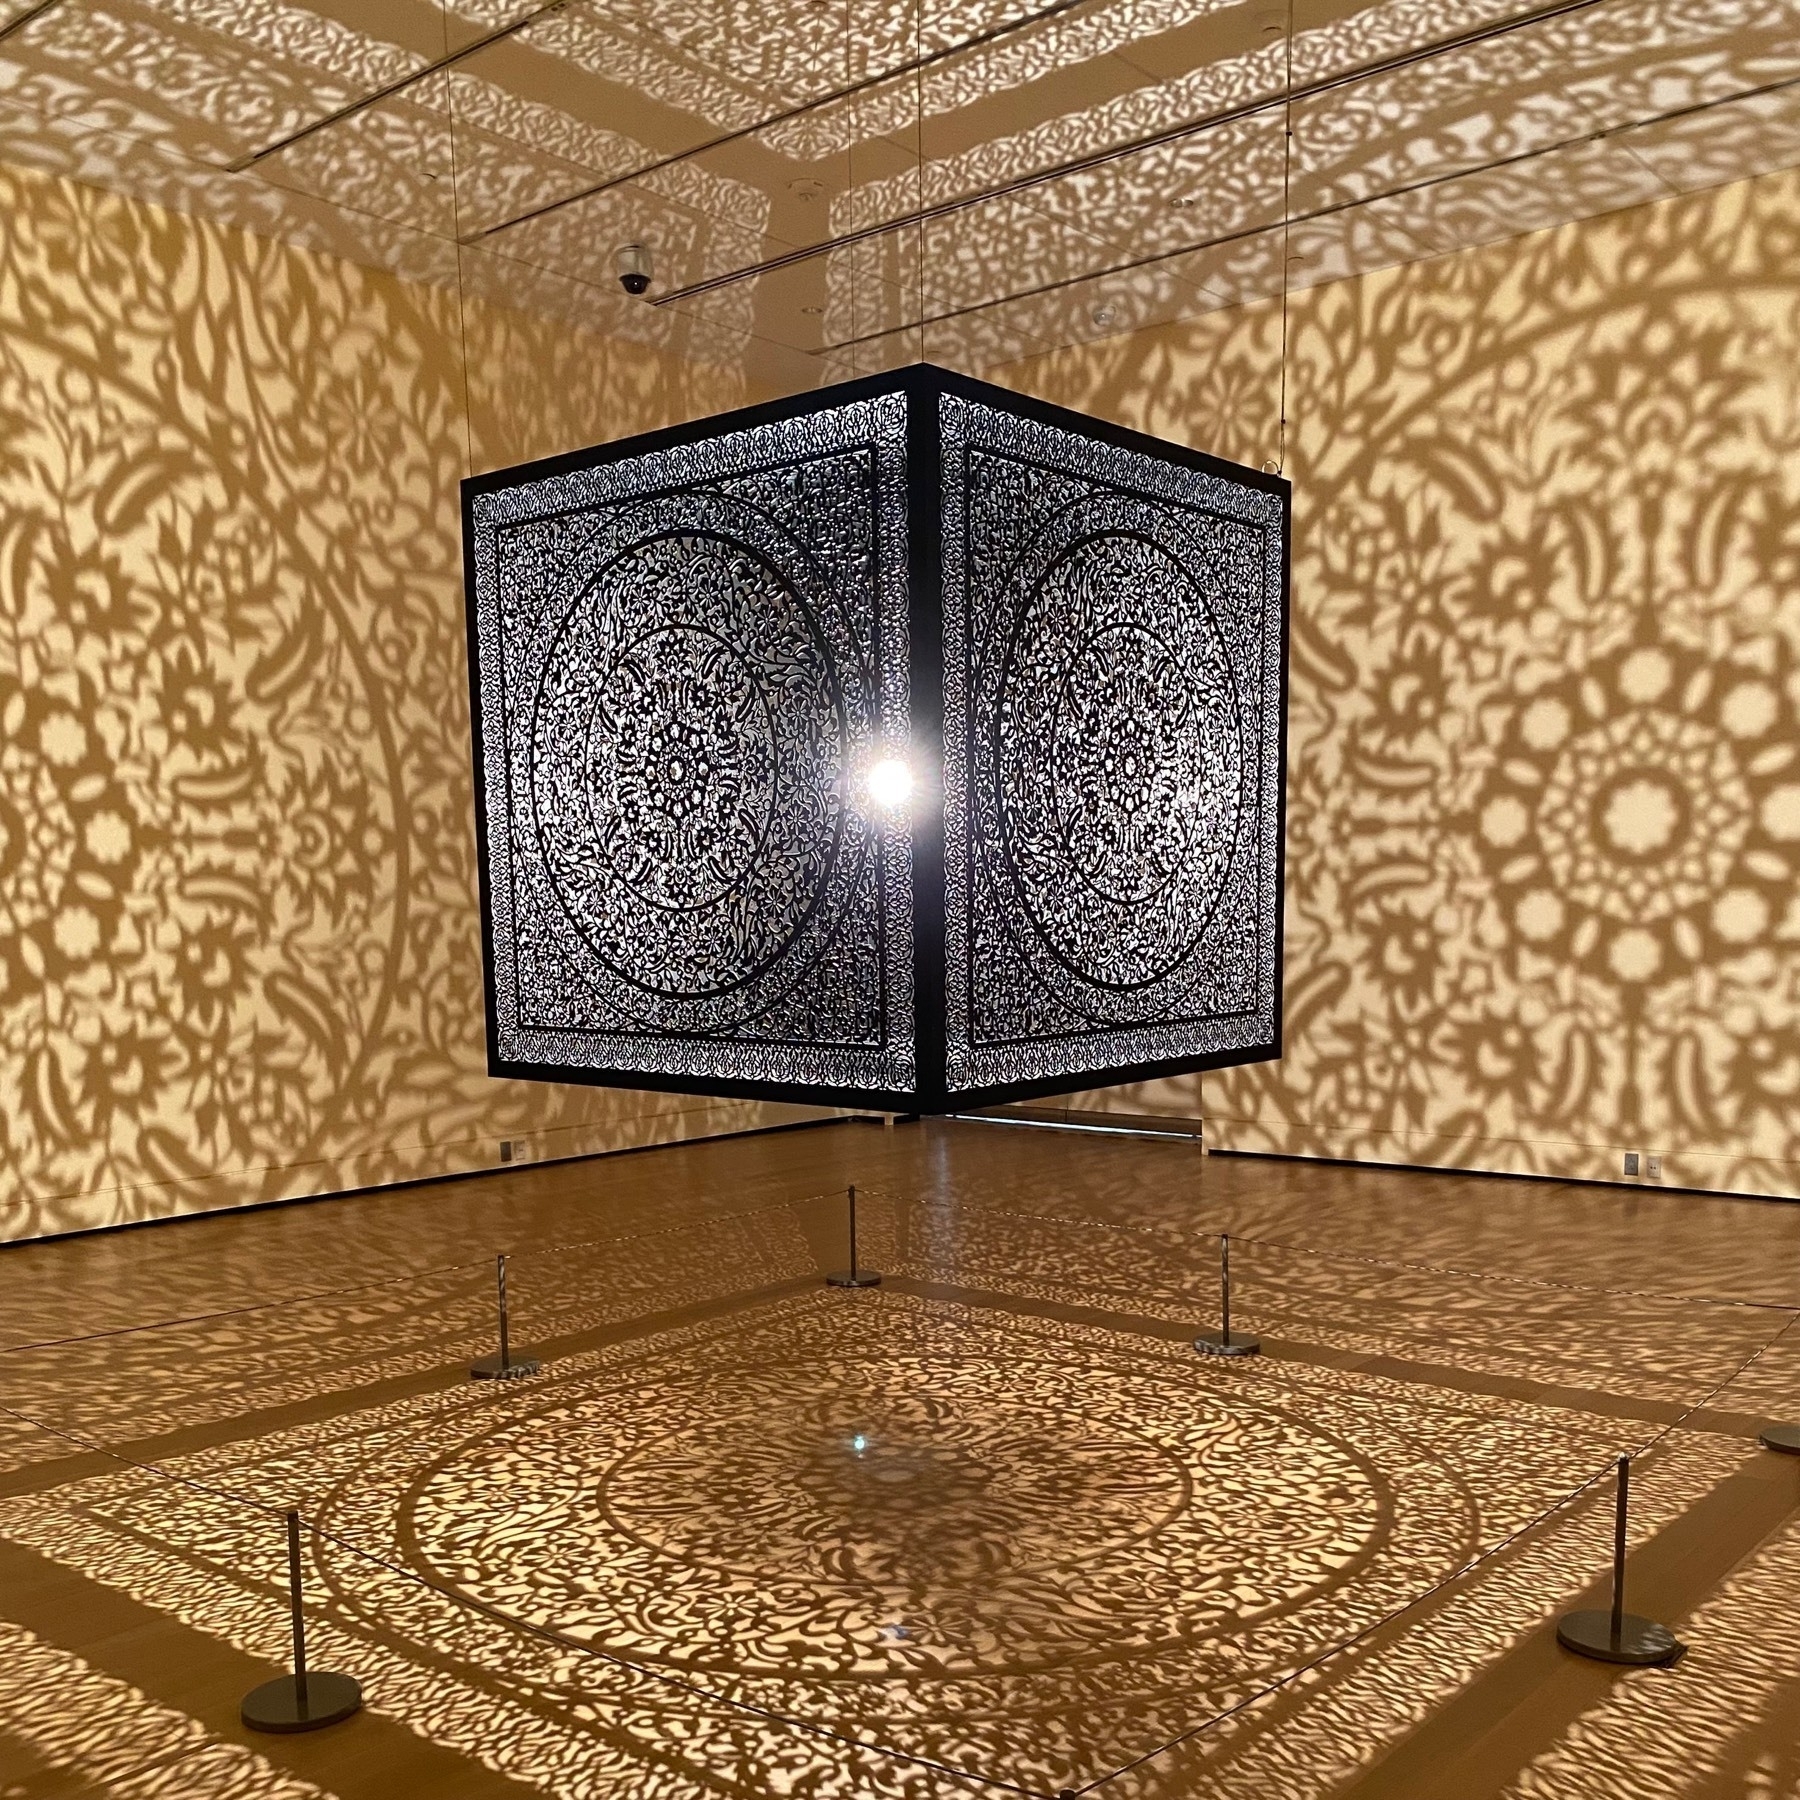 Anila Quayyum Agha, All the Flowers Are for Me,
2015, metal cube sculpture with a bright light in the center casting an elaborate mesh of shadows on the walls, ceiling, and floor.